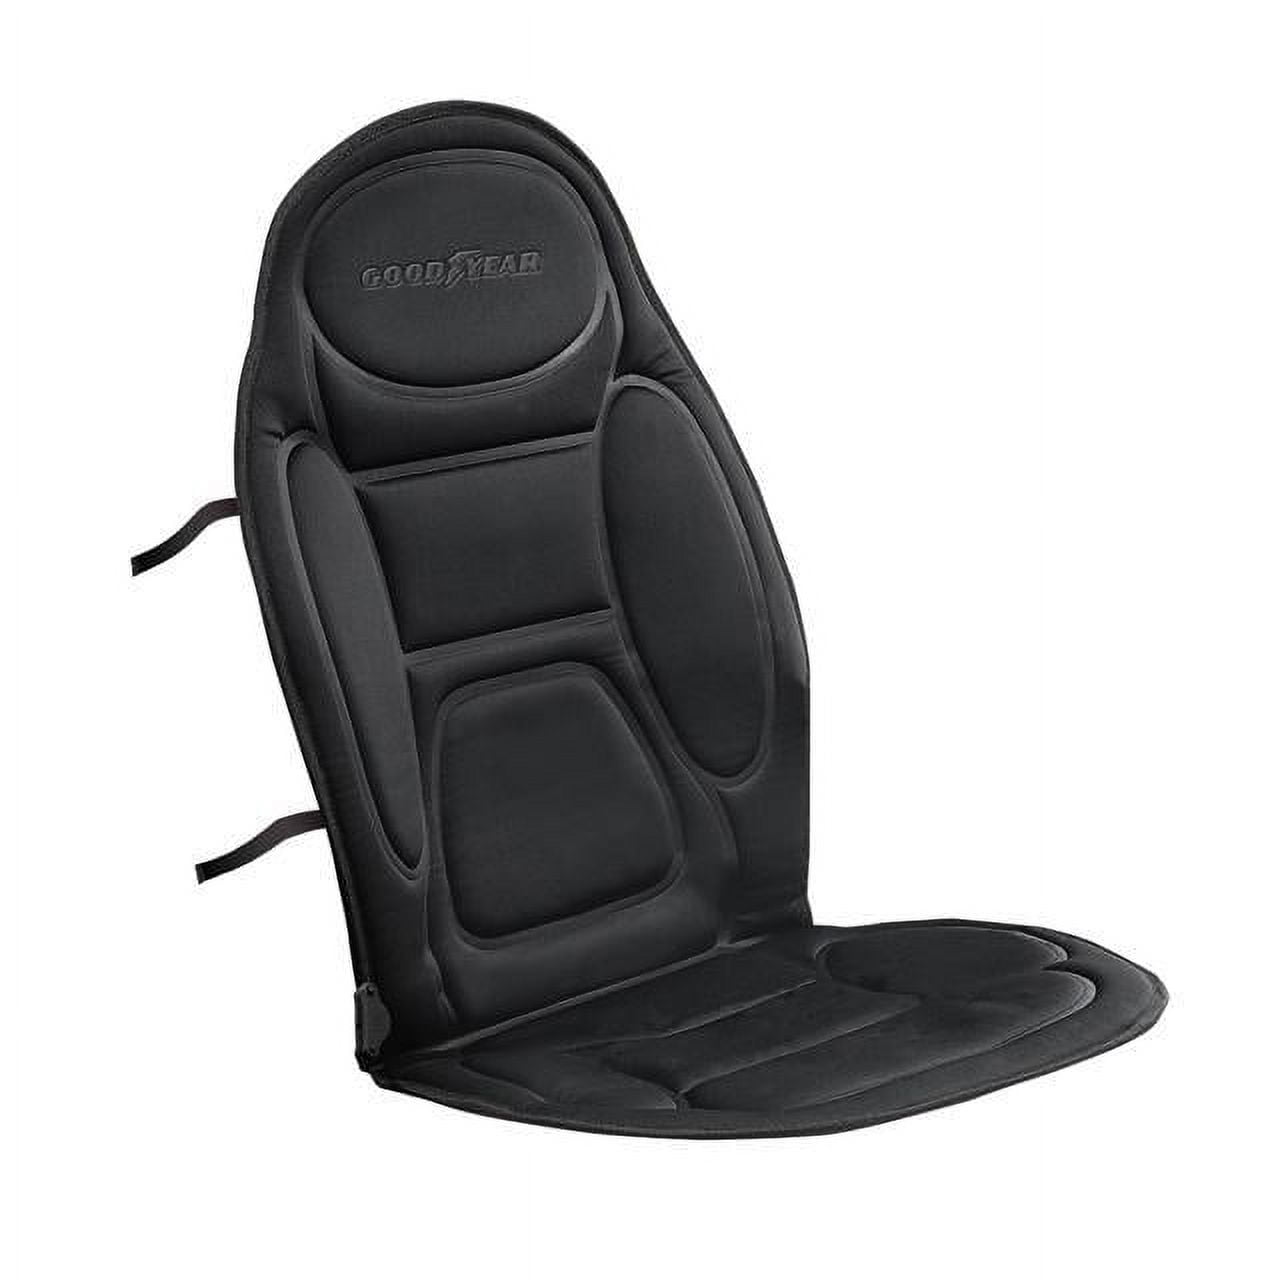  Goodyear GY1143 - Thin & Firm Seat Cushion with Gel for Office  Chair or Car : Automotive